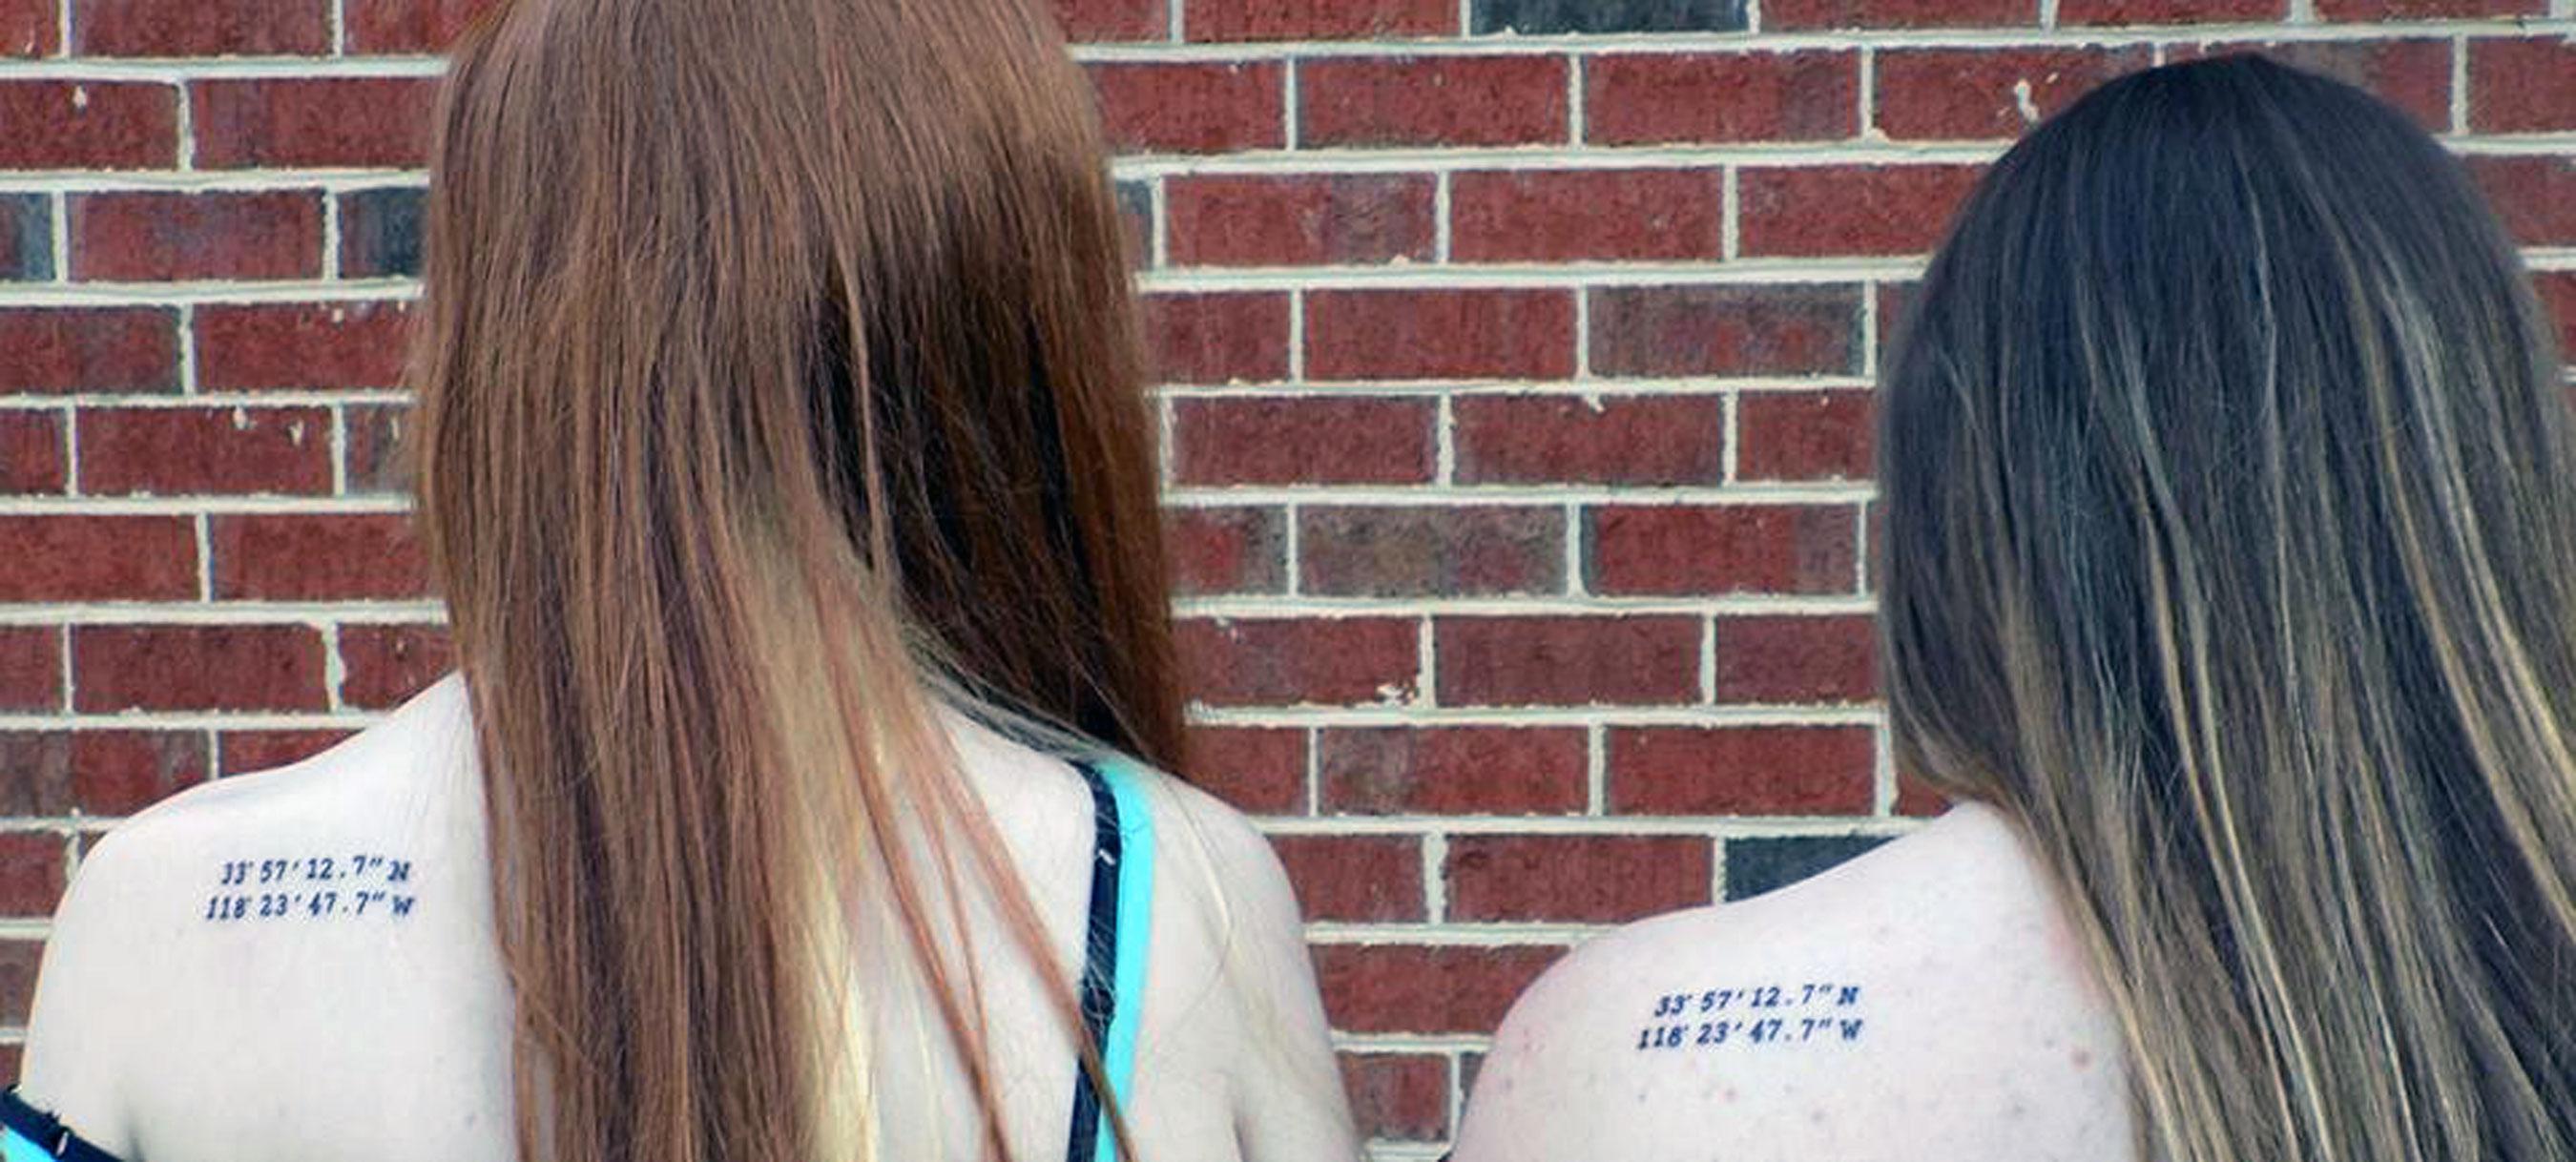 Two women pictured with coordinates pictured tattooed on their shoulder blades